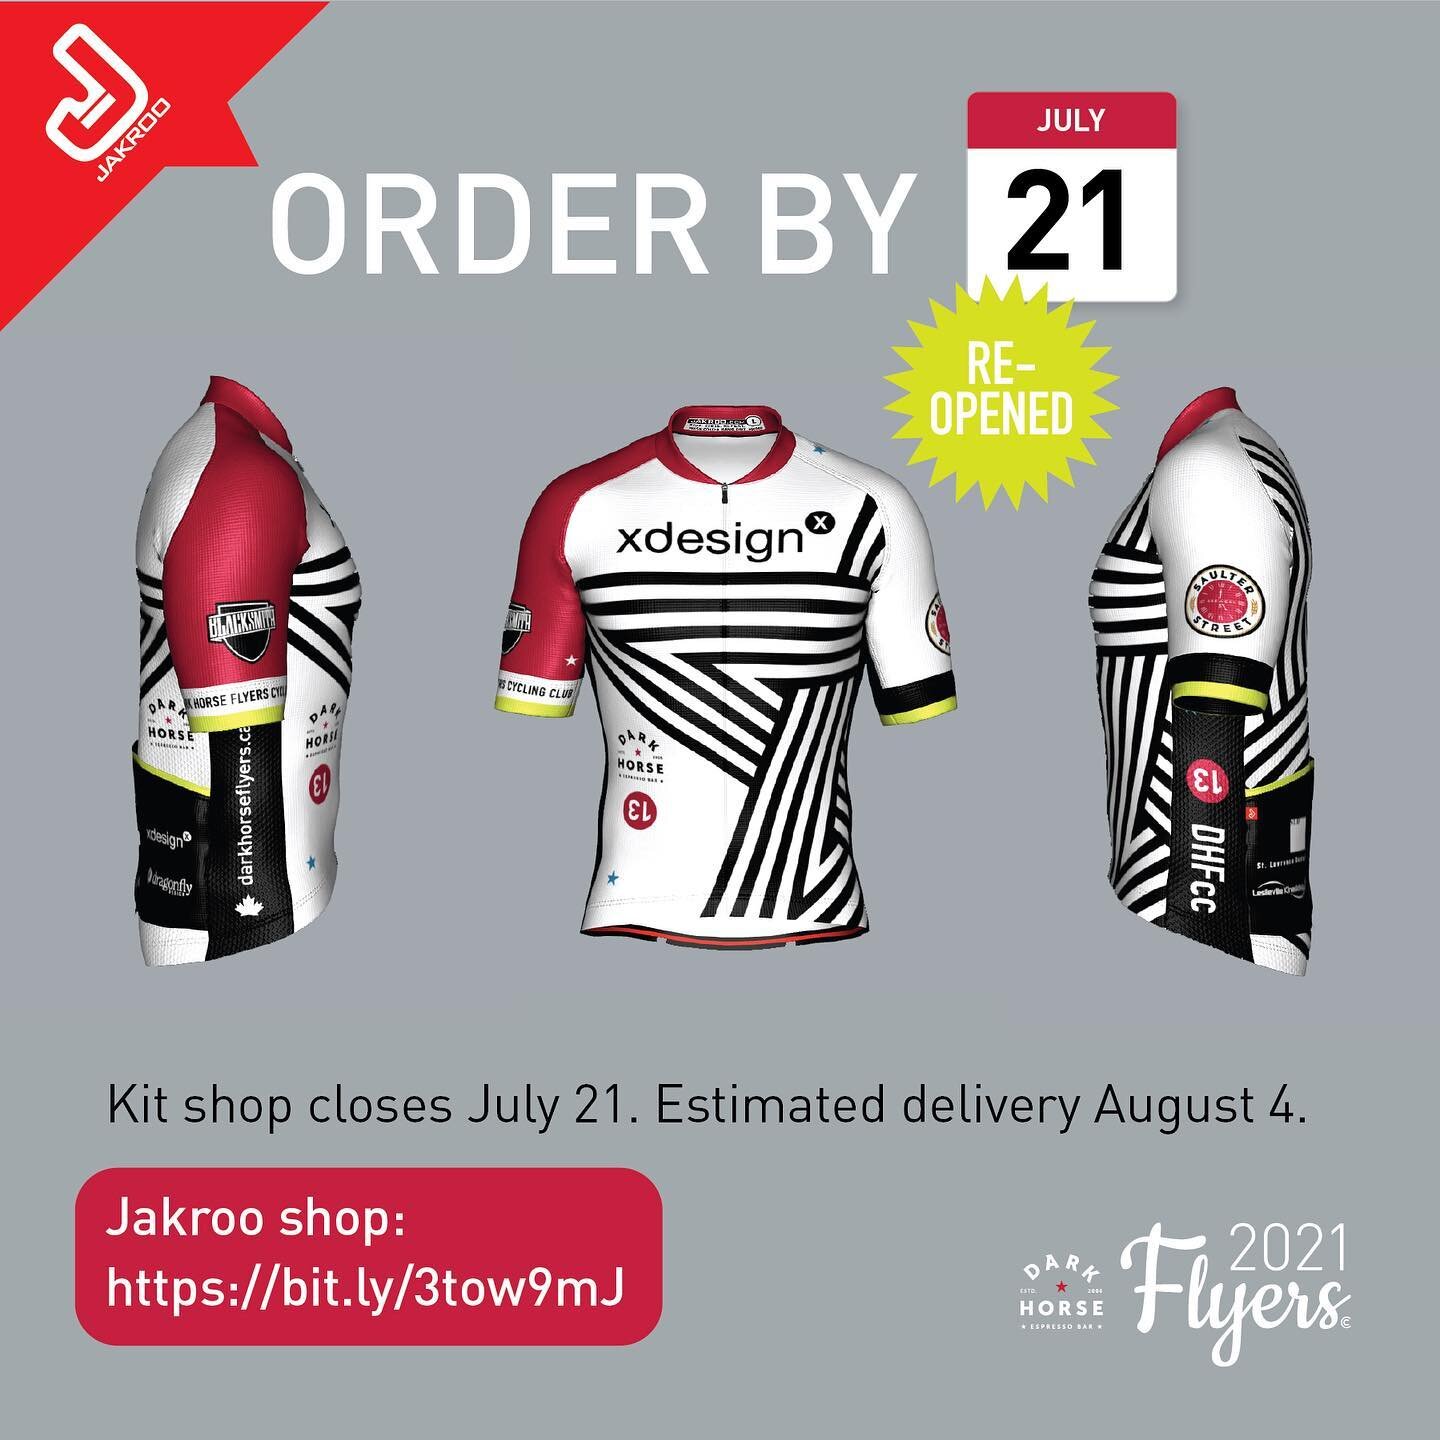 REOPENED! 

Our 2021 club kit is available for purchase. Order by July 21 and receive delivery to your door estimated for August 4. 

Link in bio. Happy shopping!

#clubkit #cyclingclub #jakroocanada #dhflyerscc #cyclingkit